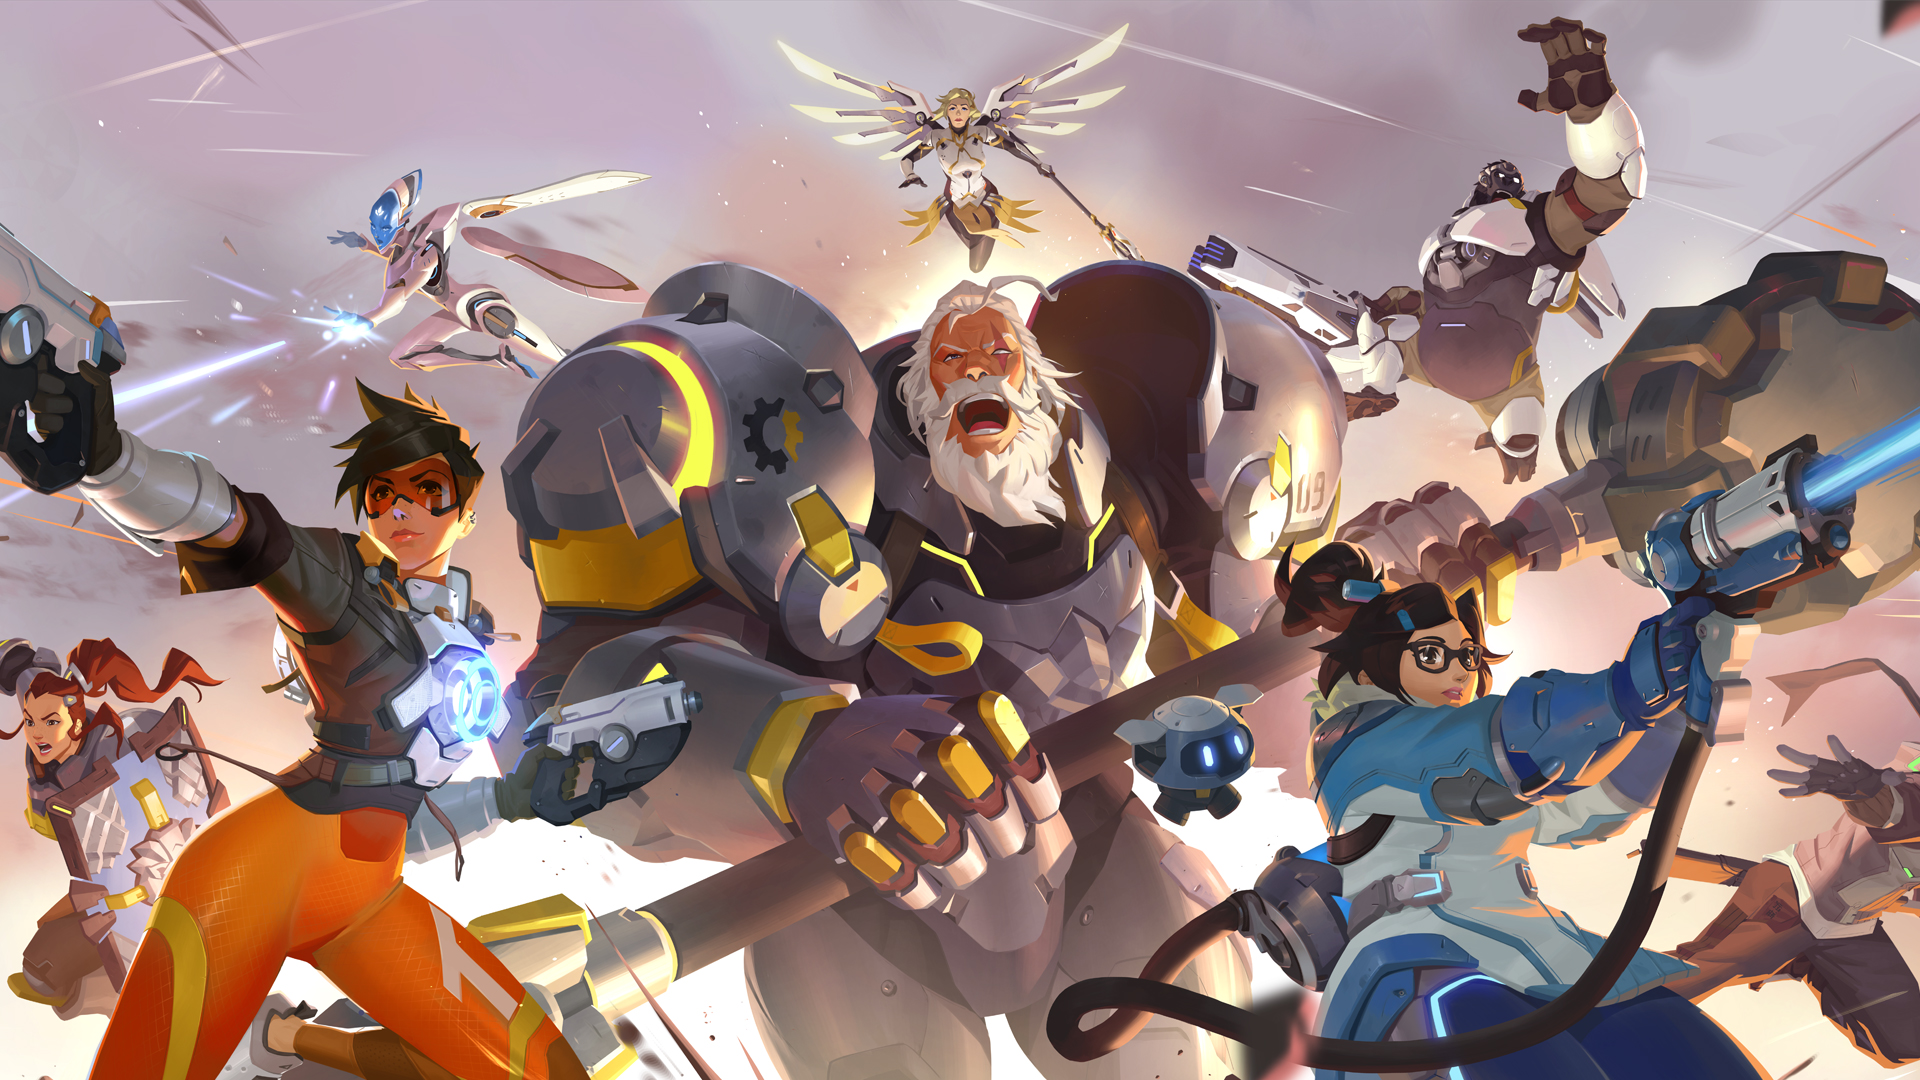 Overwatch 2 release date, new modes, maps, heroes, and everything we know so far | GamesRadar+